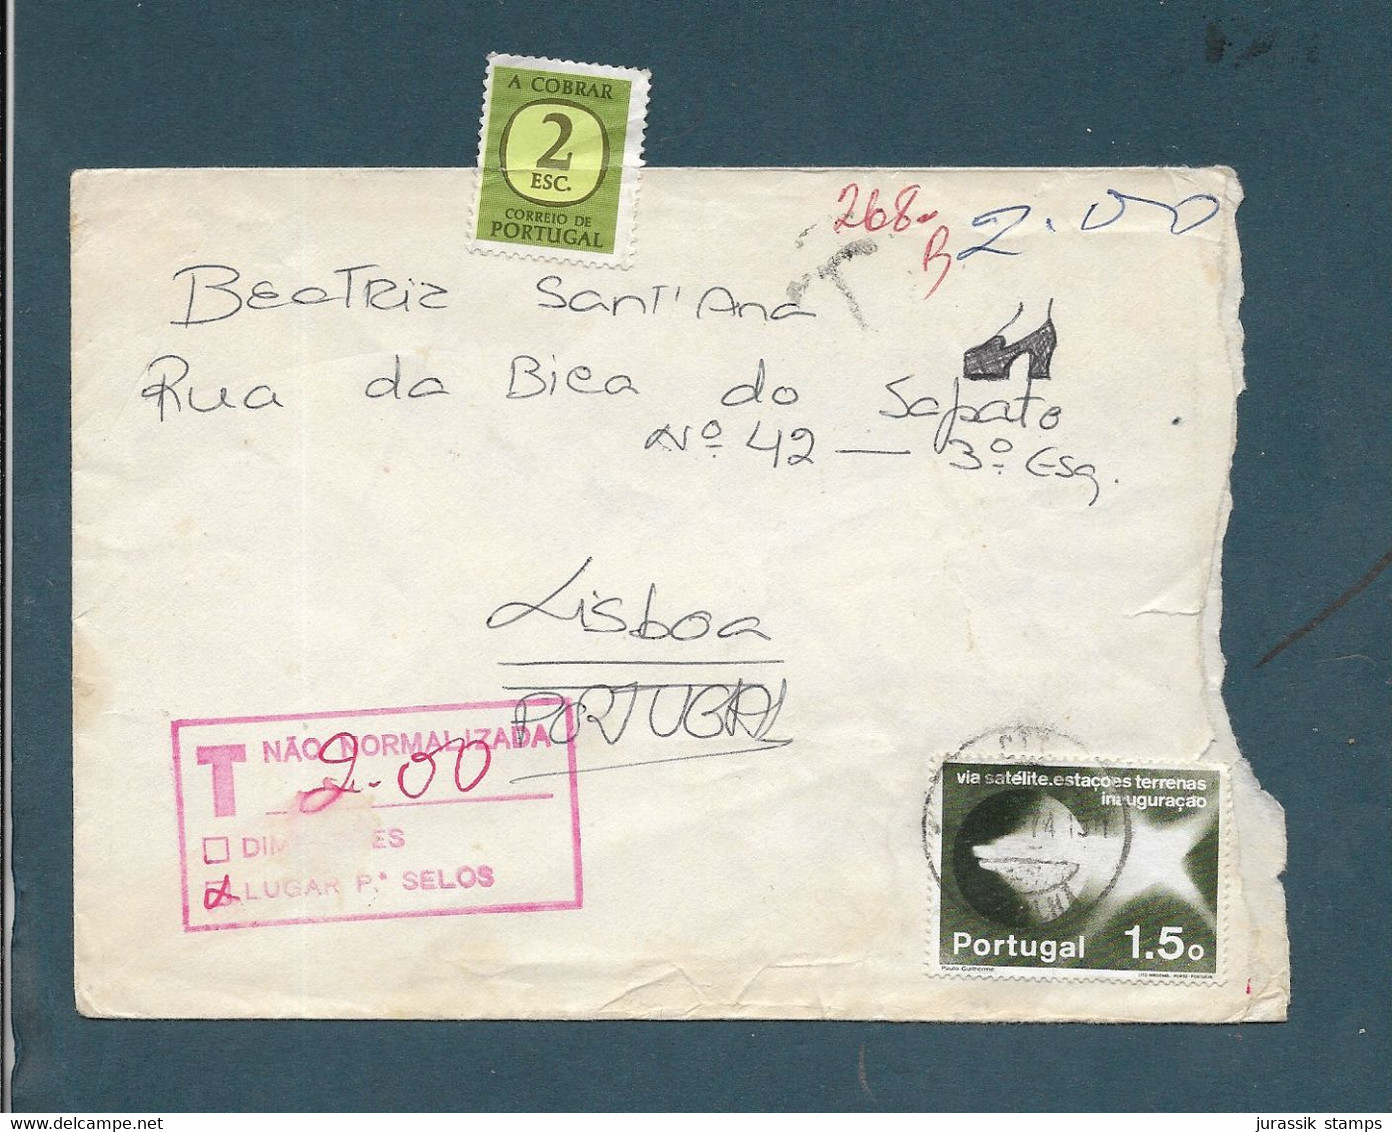 Portugal  -1974 COVER POSTAGE DUE  - P2121 - Covers & Documents